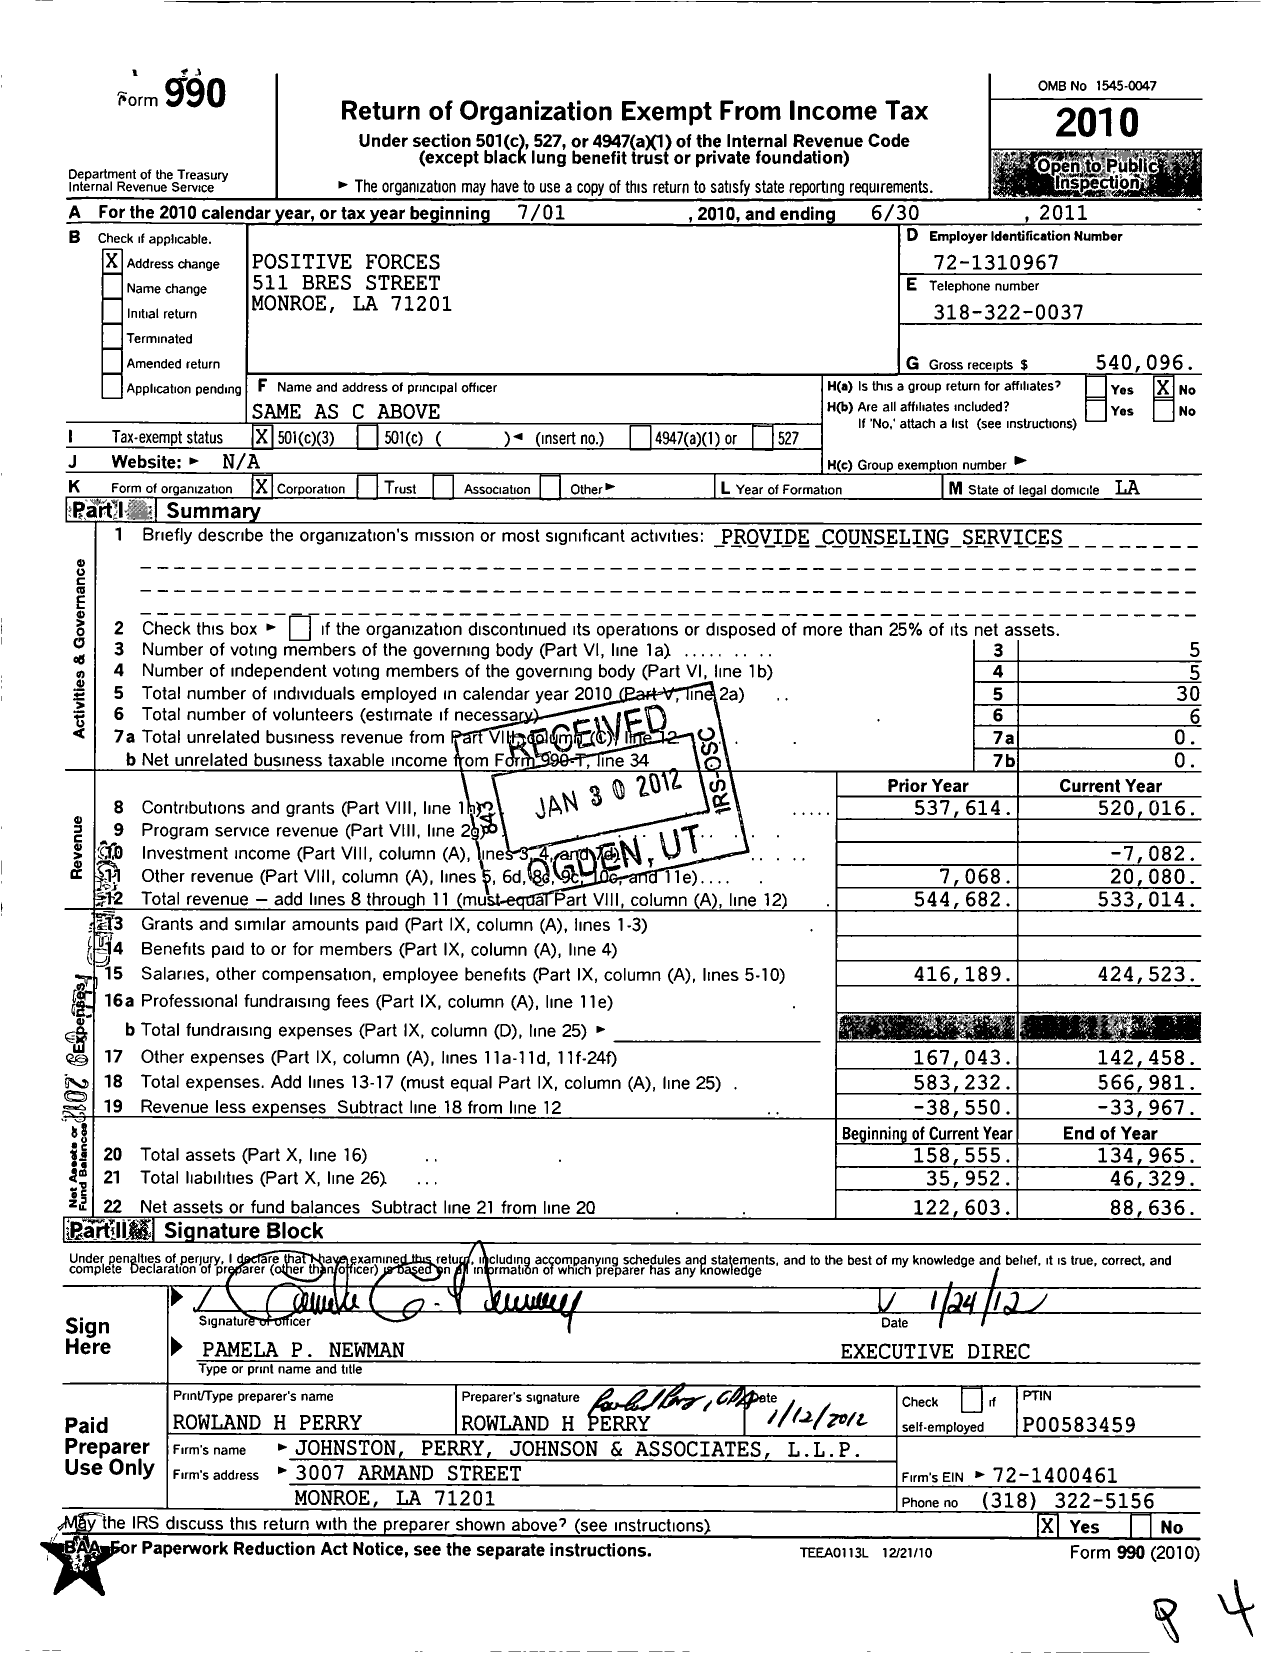 Image of first page of 2010 Form 990 for Positive Forces Counseling Network